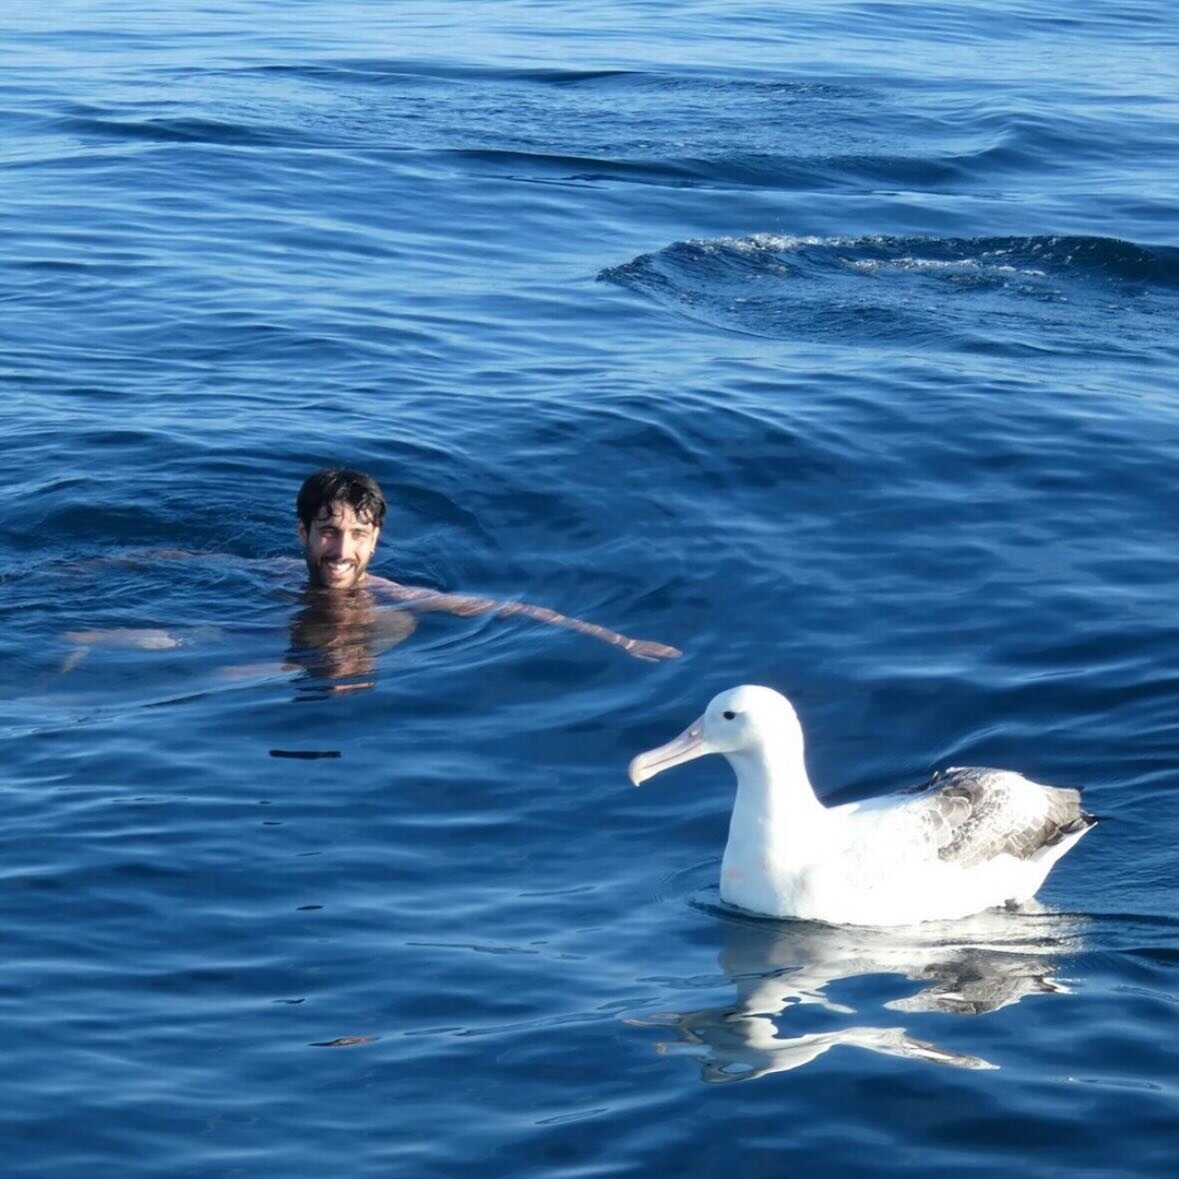 Making waves in Dunedin Harbour with a albatross co-pilot &ndash; because swimming is better with a winged companion! 

📷 @tropico_decapricornio